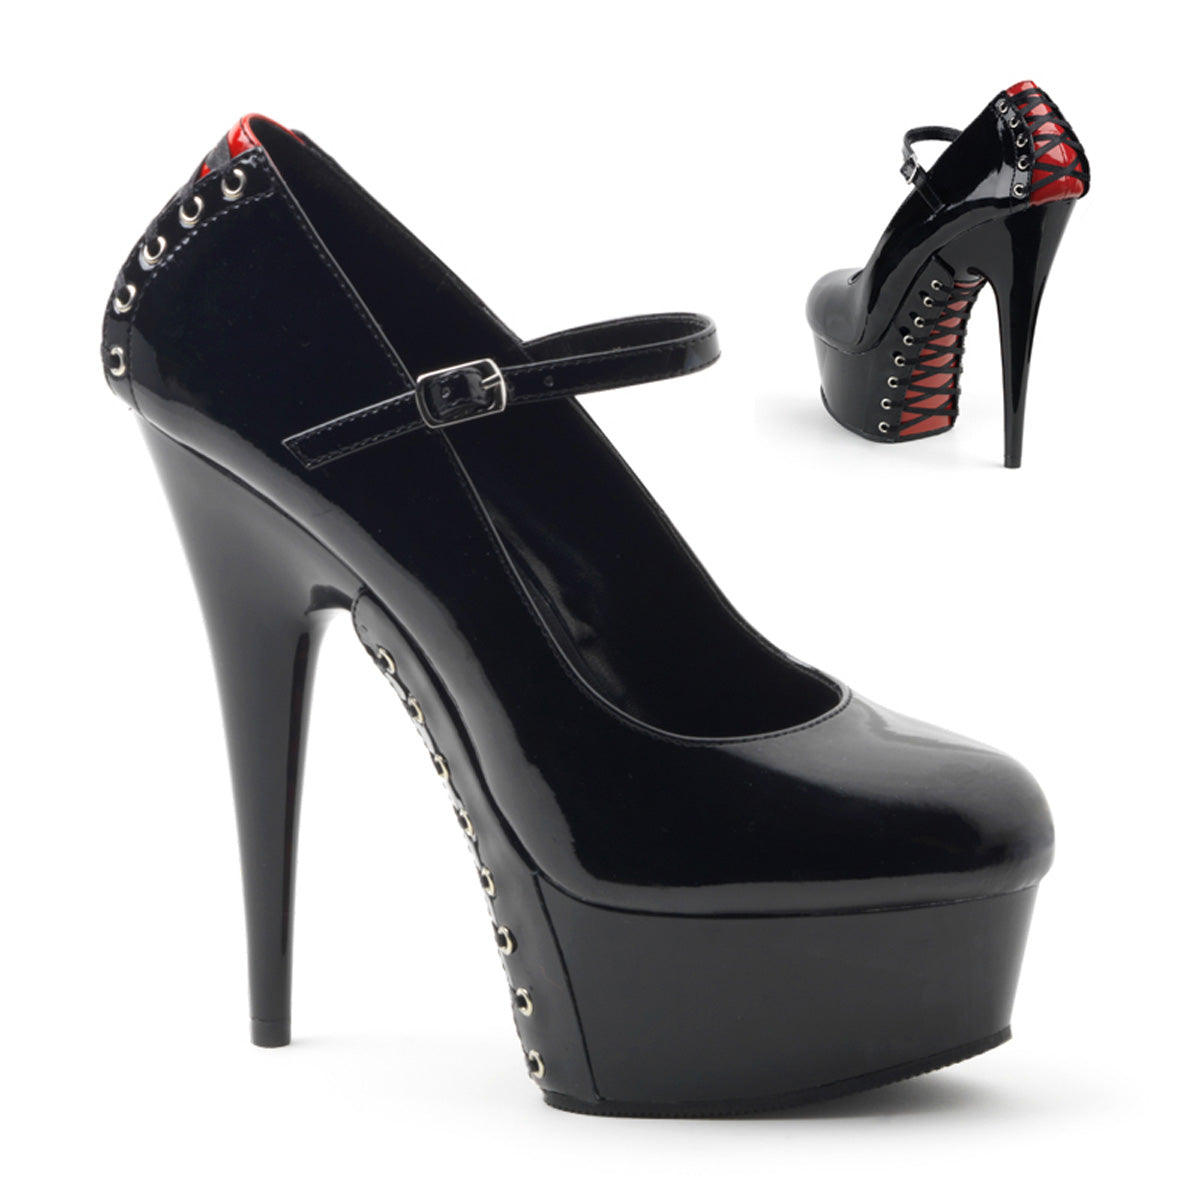 DELIGHT-687FH 6" Heel Black and Red Pole Dancing Platforms-Pleaser- Sexy Shoes